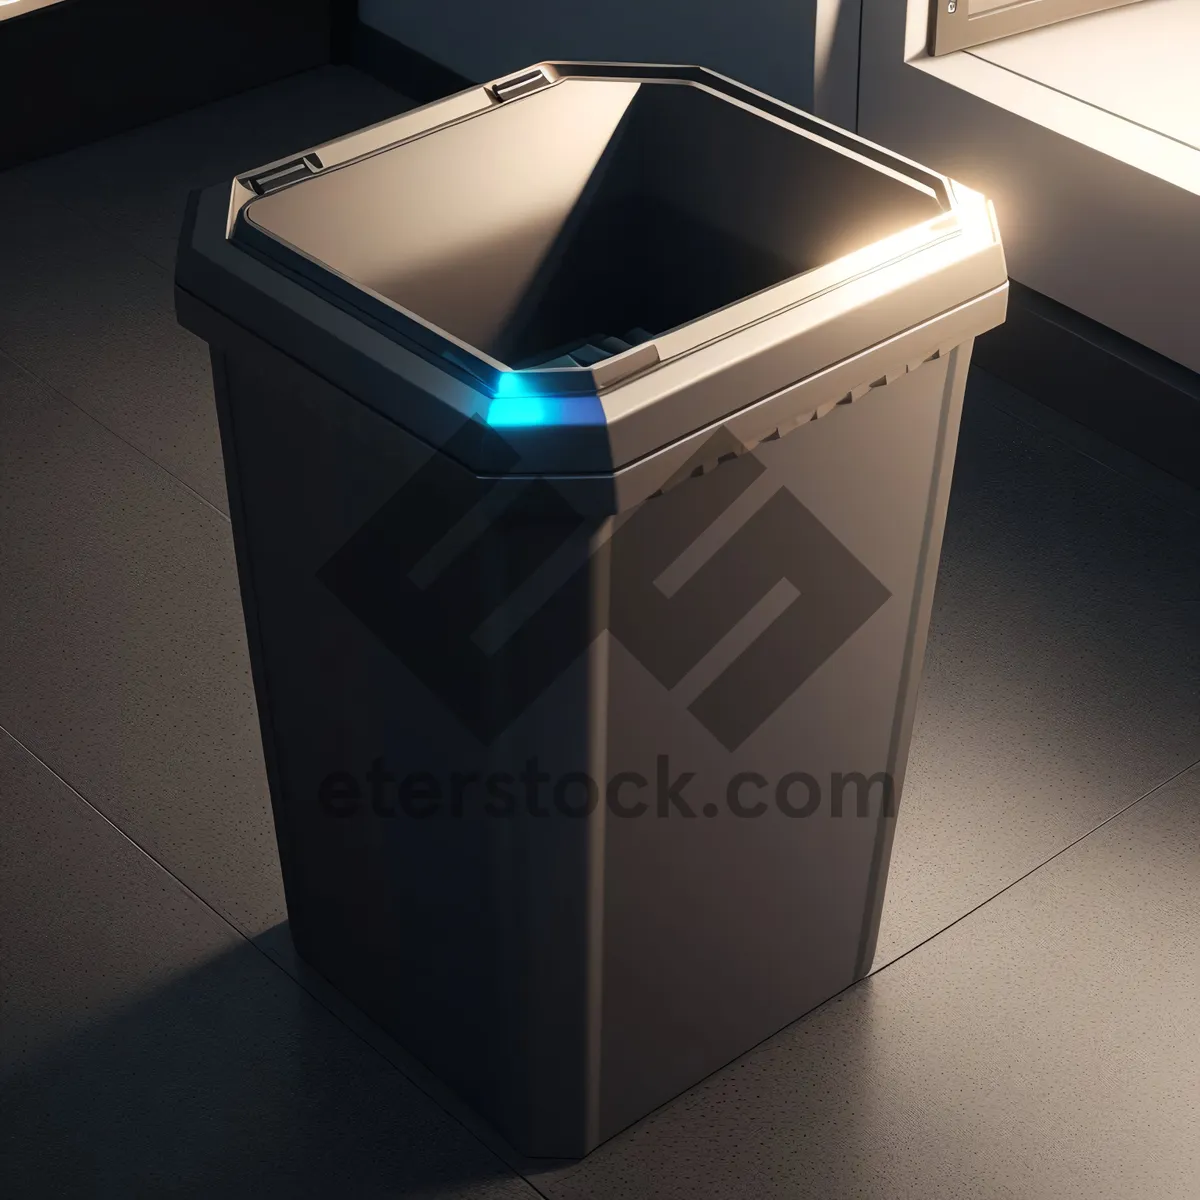 Picture of White Goods Recycling Bin: Sustainable Appliance Disposal Solution